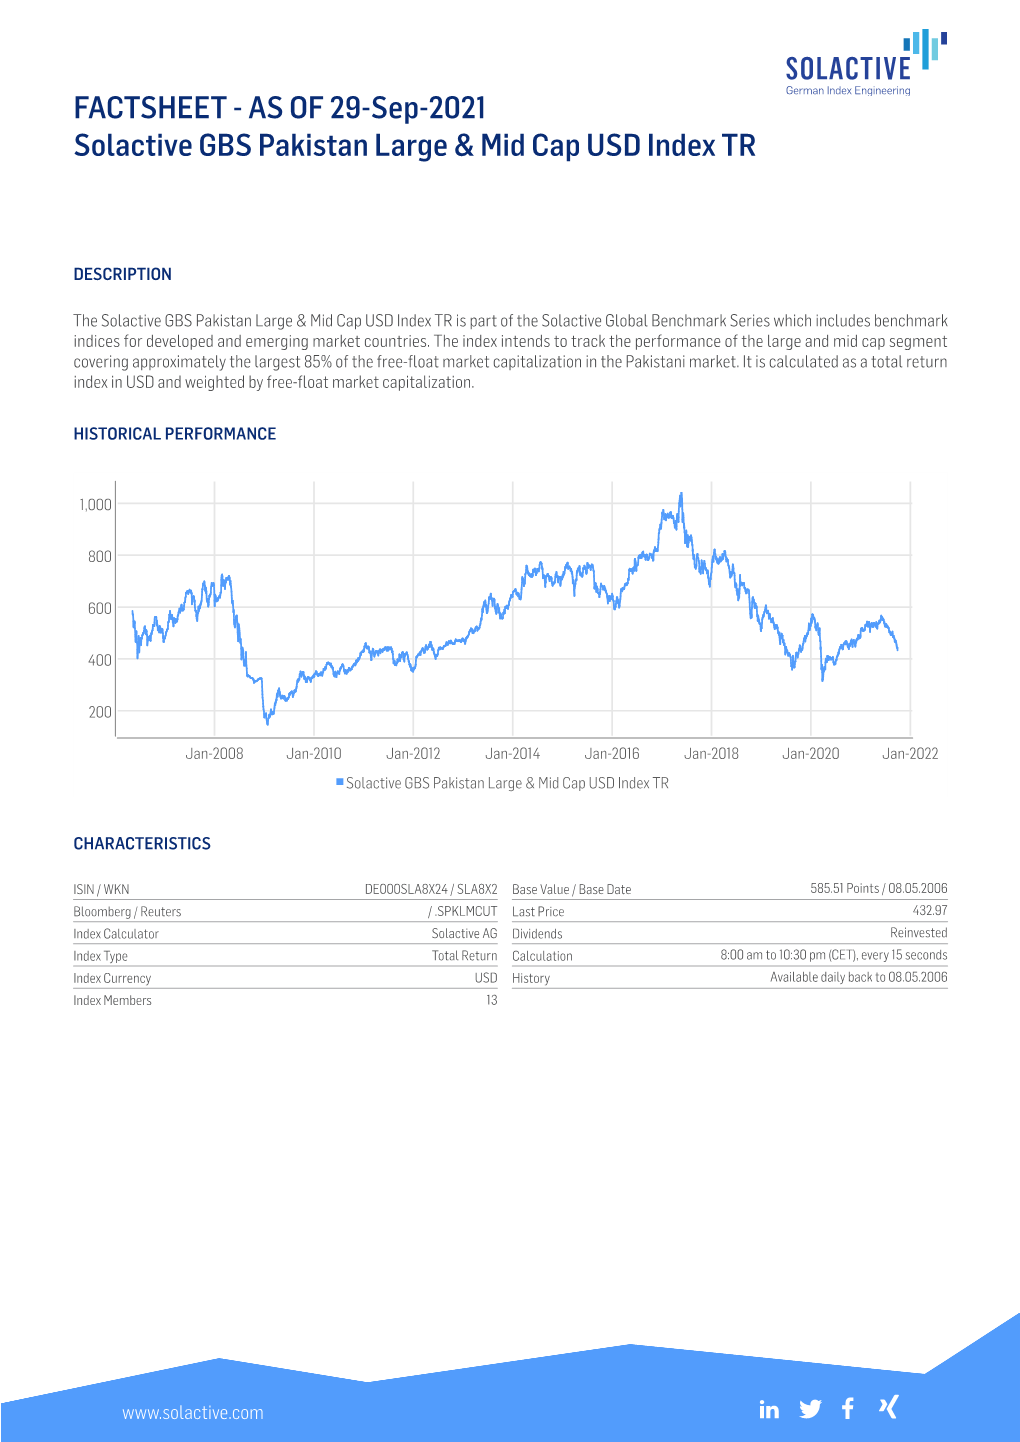 FACTSHEET - AS of 29-Sep-2021 Solactive GBS Pakistan Large & Mid Cap USD Index TR